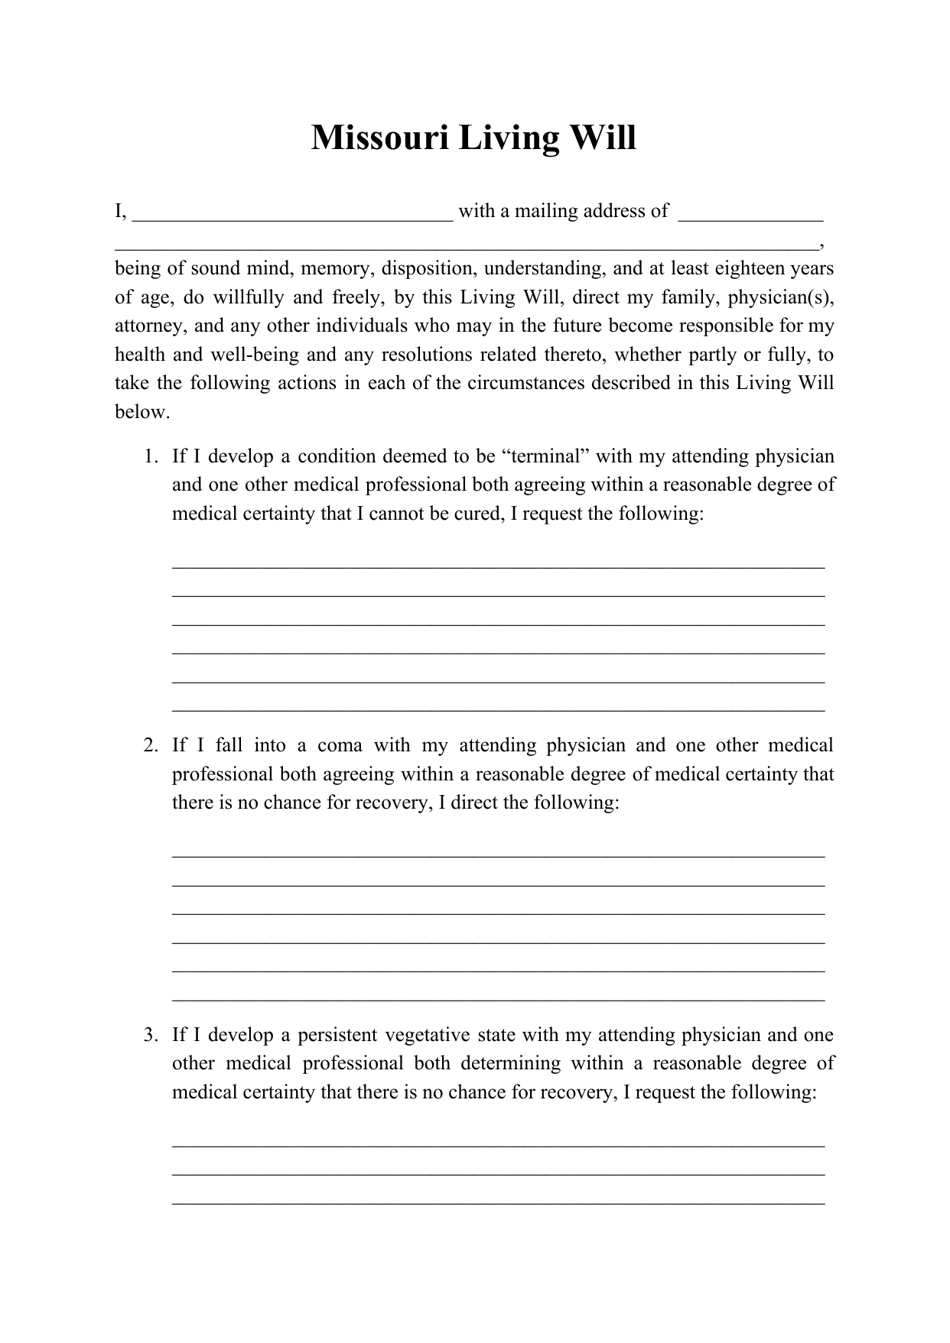 missouri-living-will-form-fill-out-sign-online-and-download-pdf